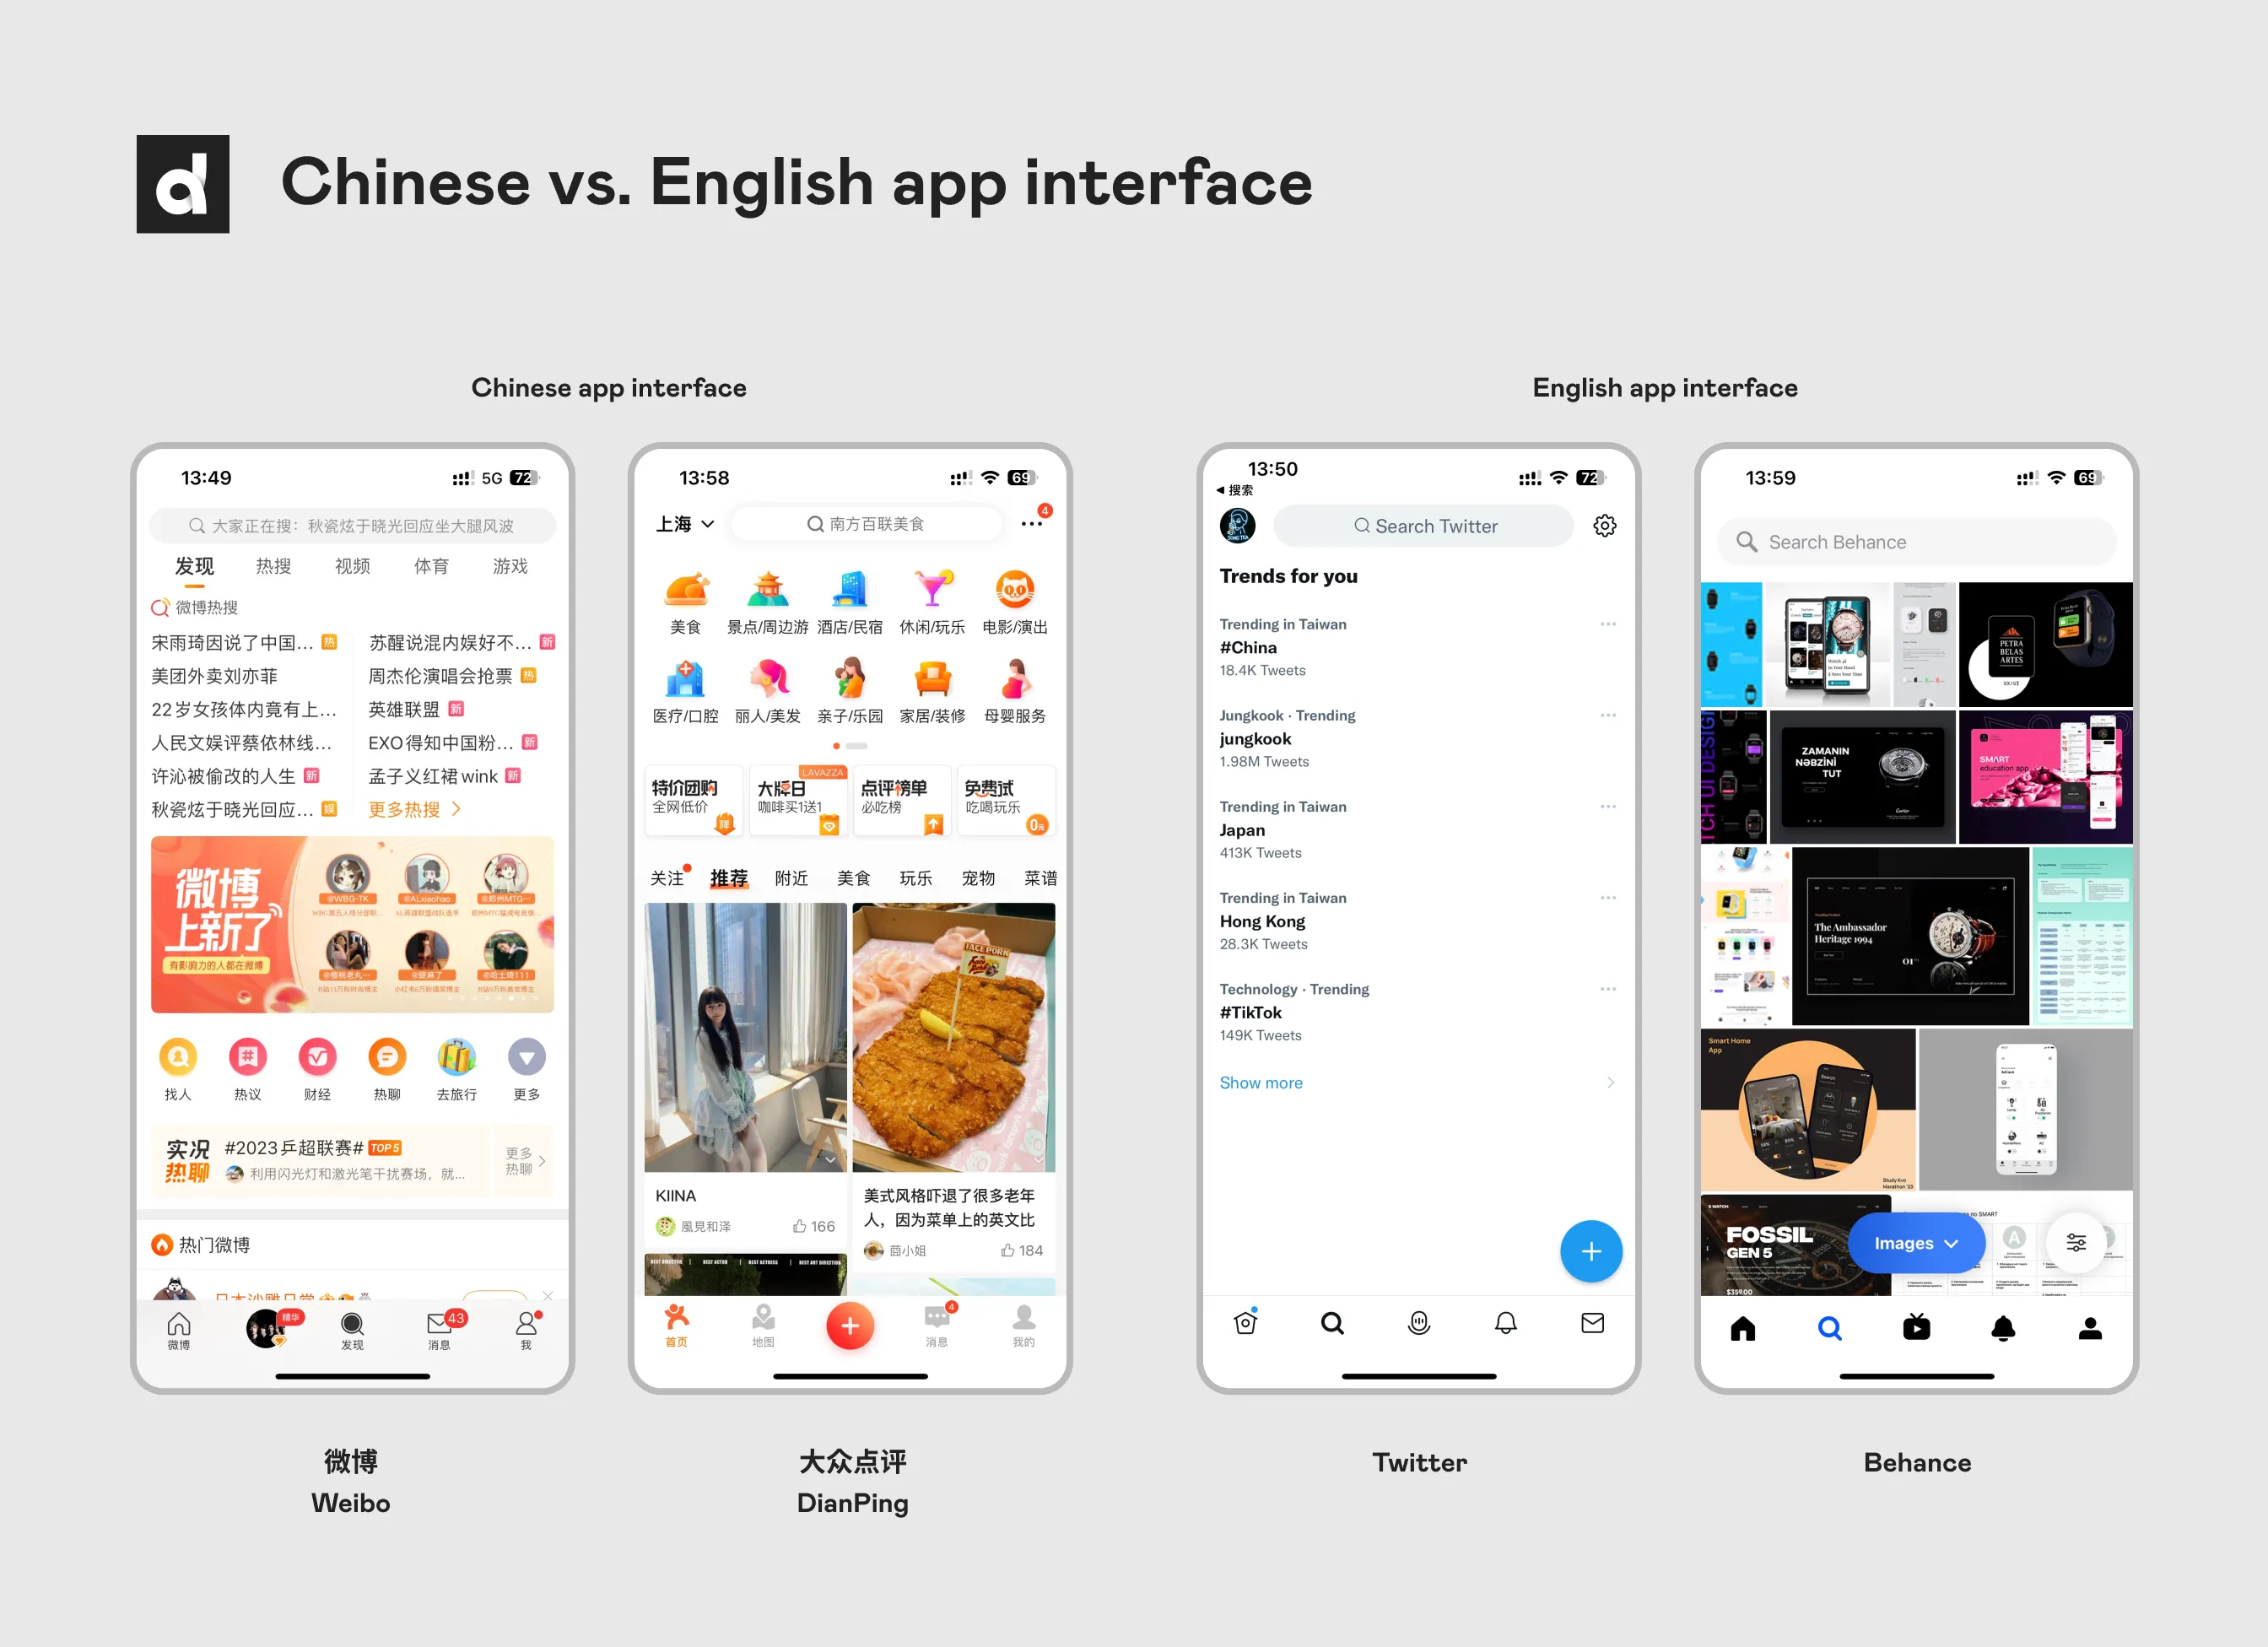 Chinese vs. English app interface showing UX differences